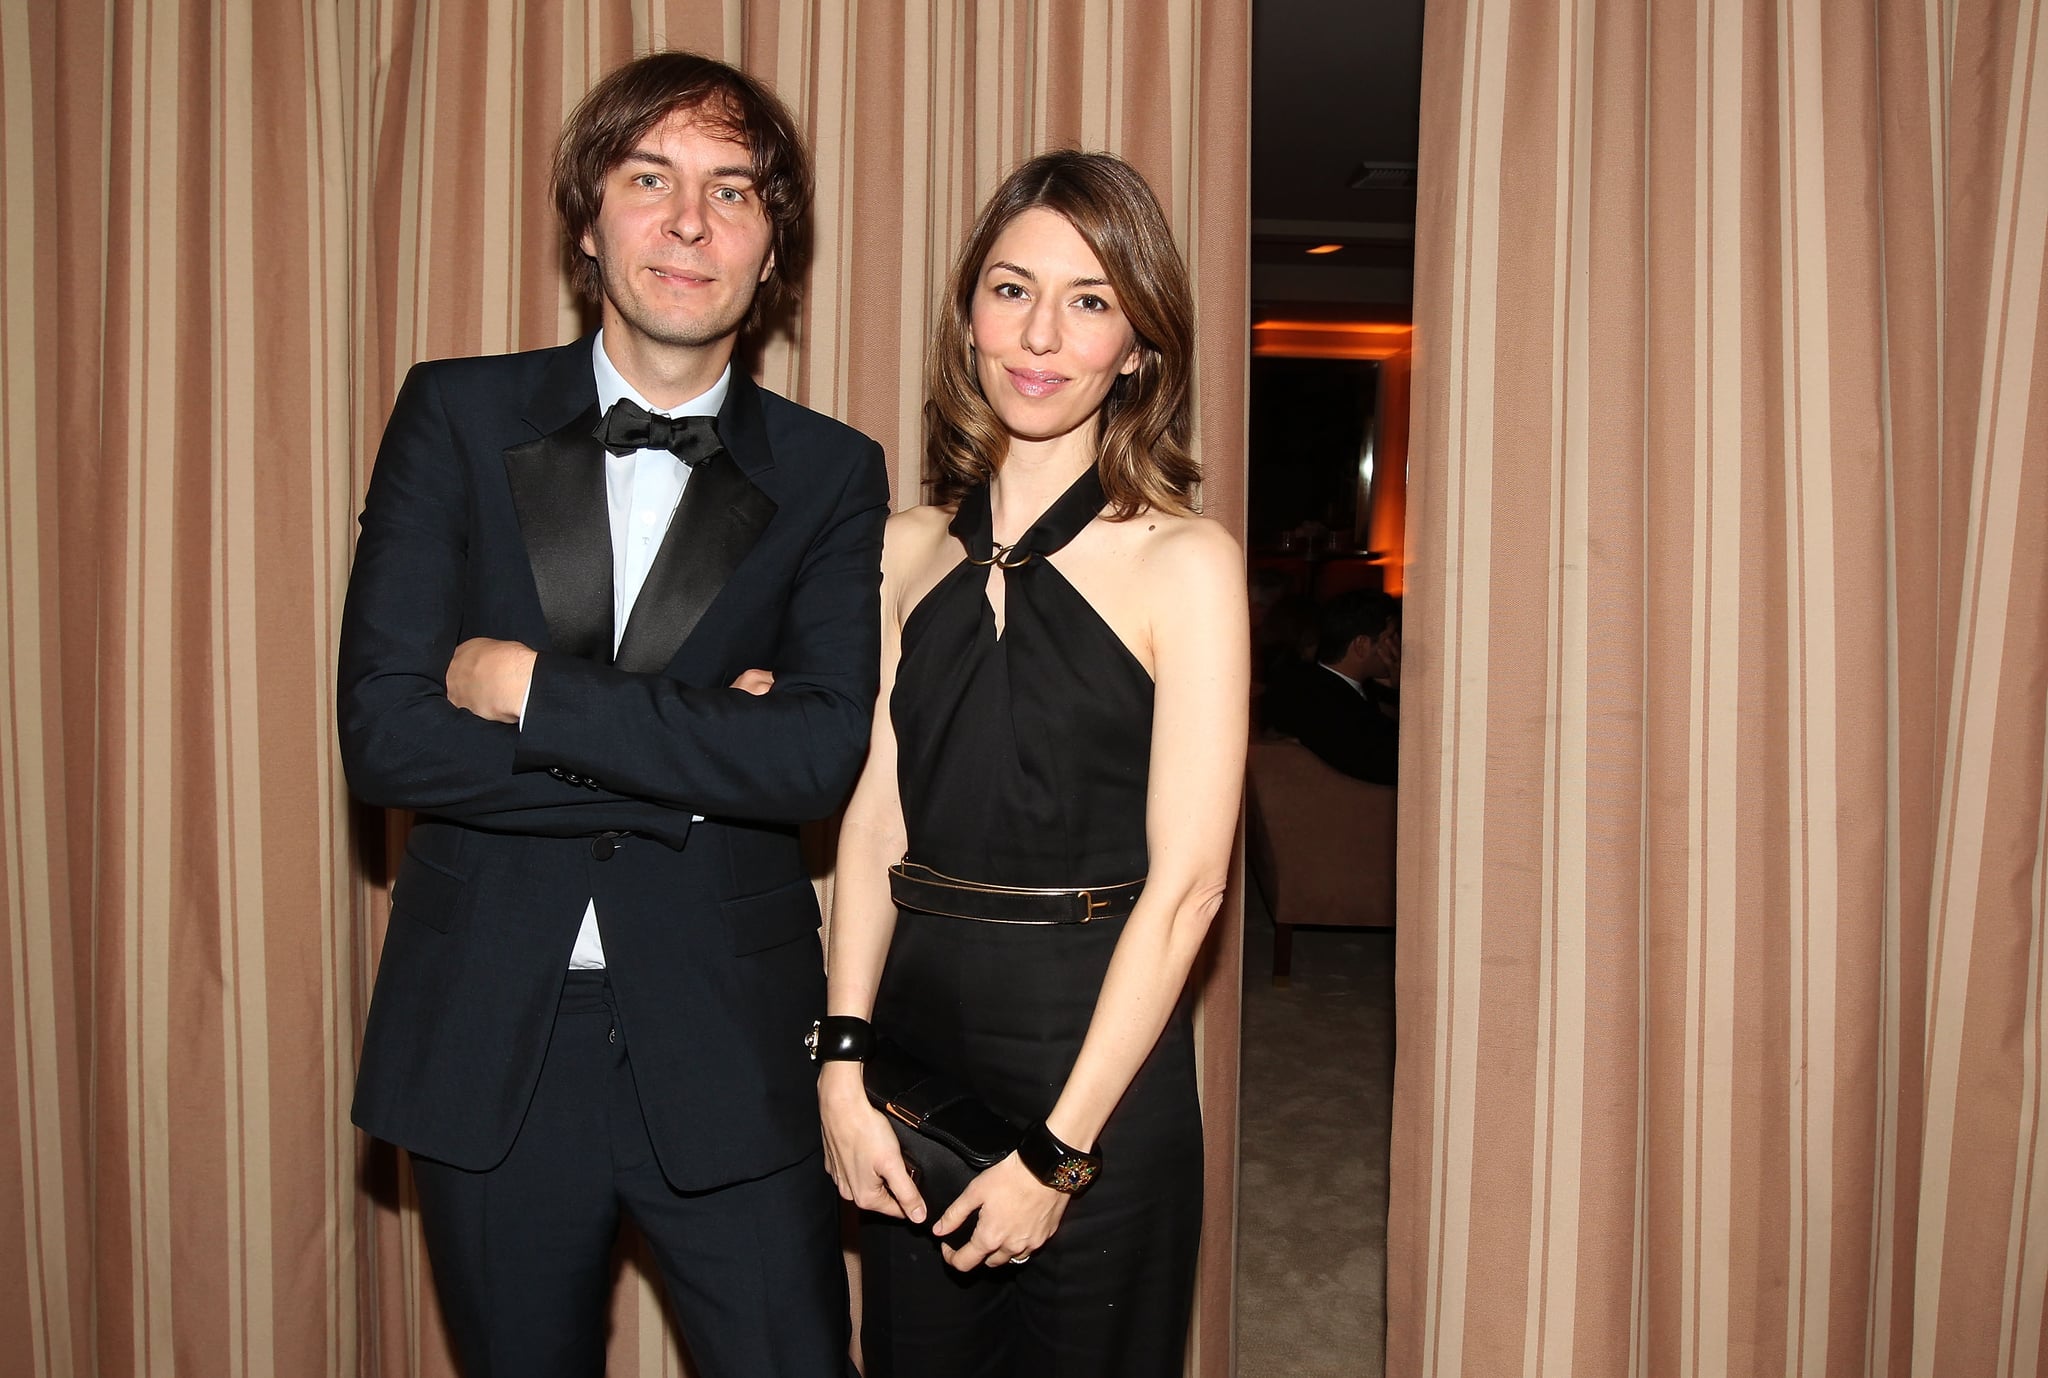 WEST HOLLYWOOD, CA - FEBRUARY 26:  (EXCLUSIVE ACCESS SPECIAL RATES APPLY; NO NORTH AMERICAN ON-AIR BROADCAST UNTIL MARCH 1, 2012) Thomas Mars and Sofia Coppola  attend the 2012 Vanity Fair Oscar Party Hosted By Graydon Carter at Sunset Tower on February 26, 2012 in West Hollywood, California.  (Photo by Christopher Polk/VF12/WireImage)